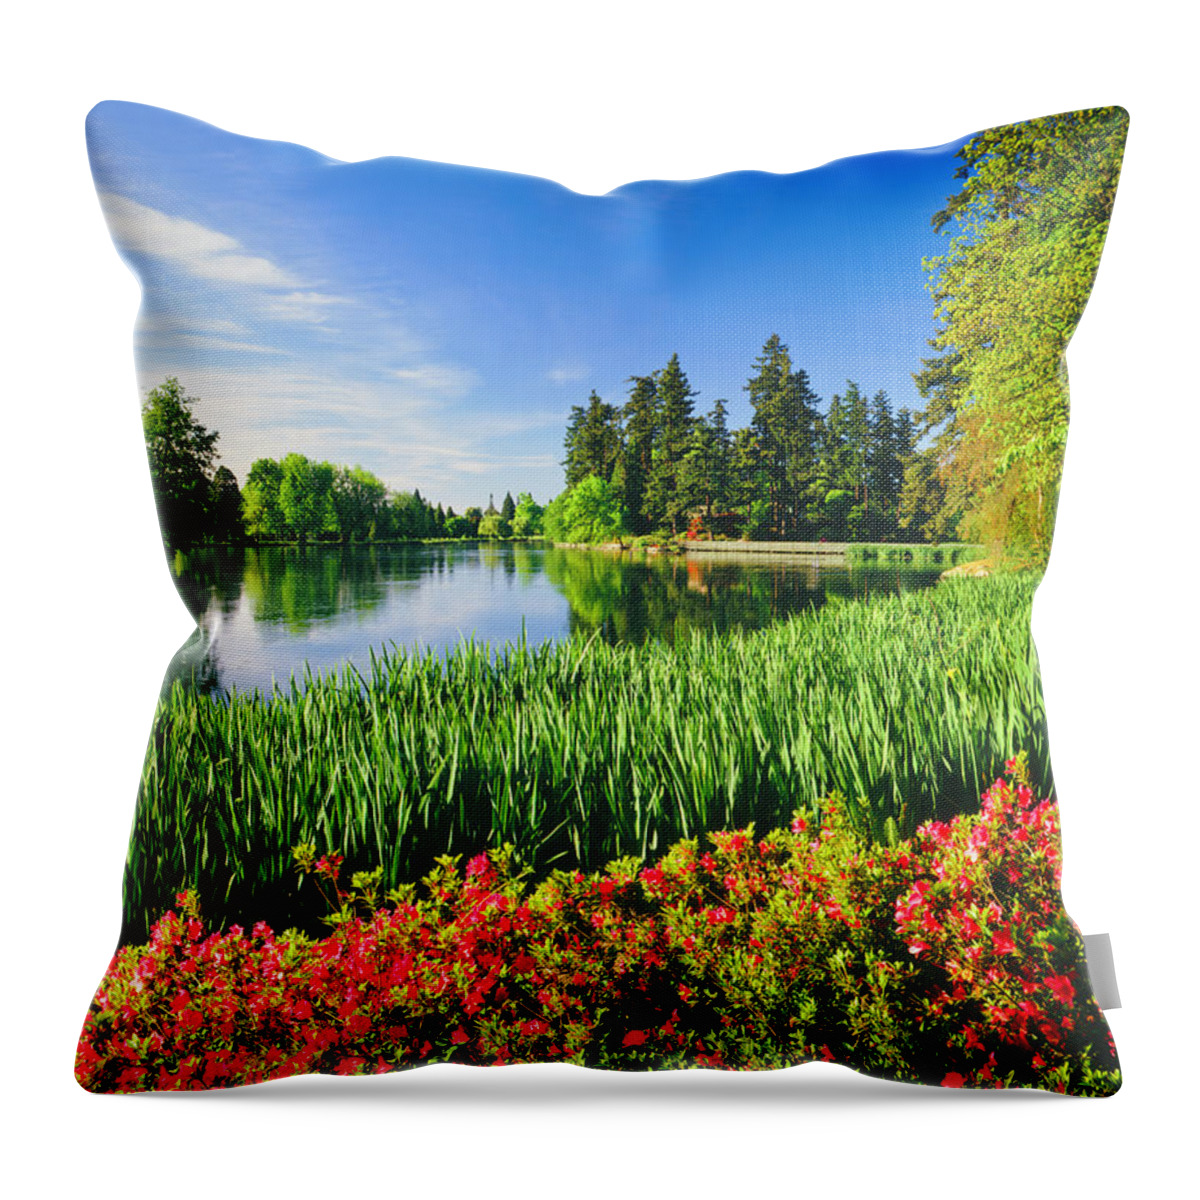 Scenics Throw Pillow featuring the photograph Spring In Portland Oregon by Ron thomas